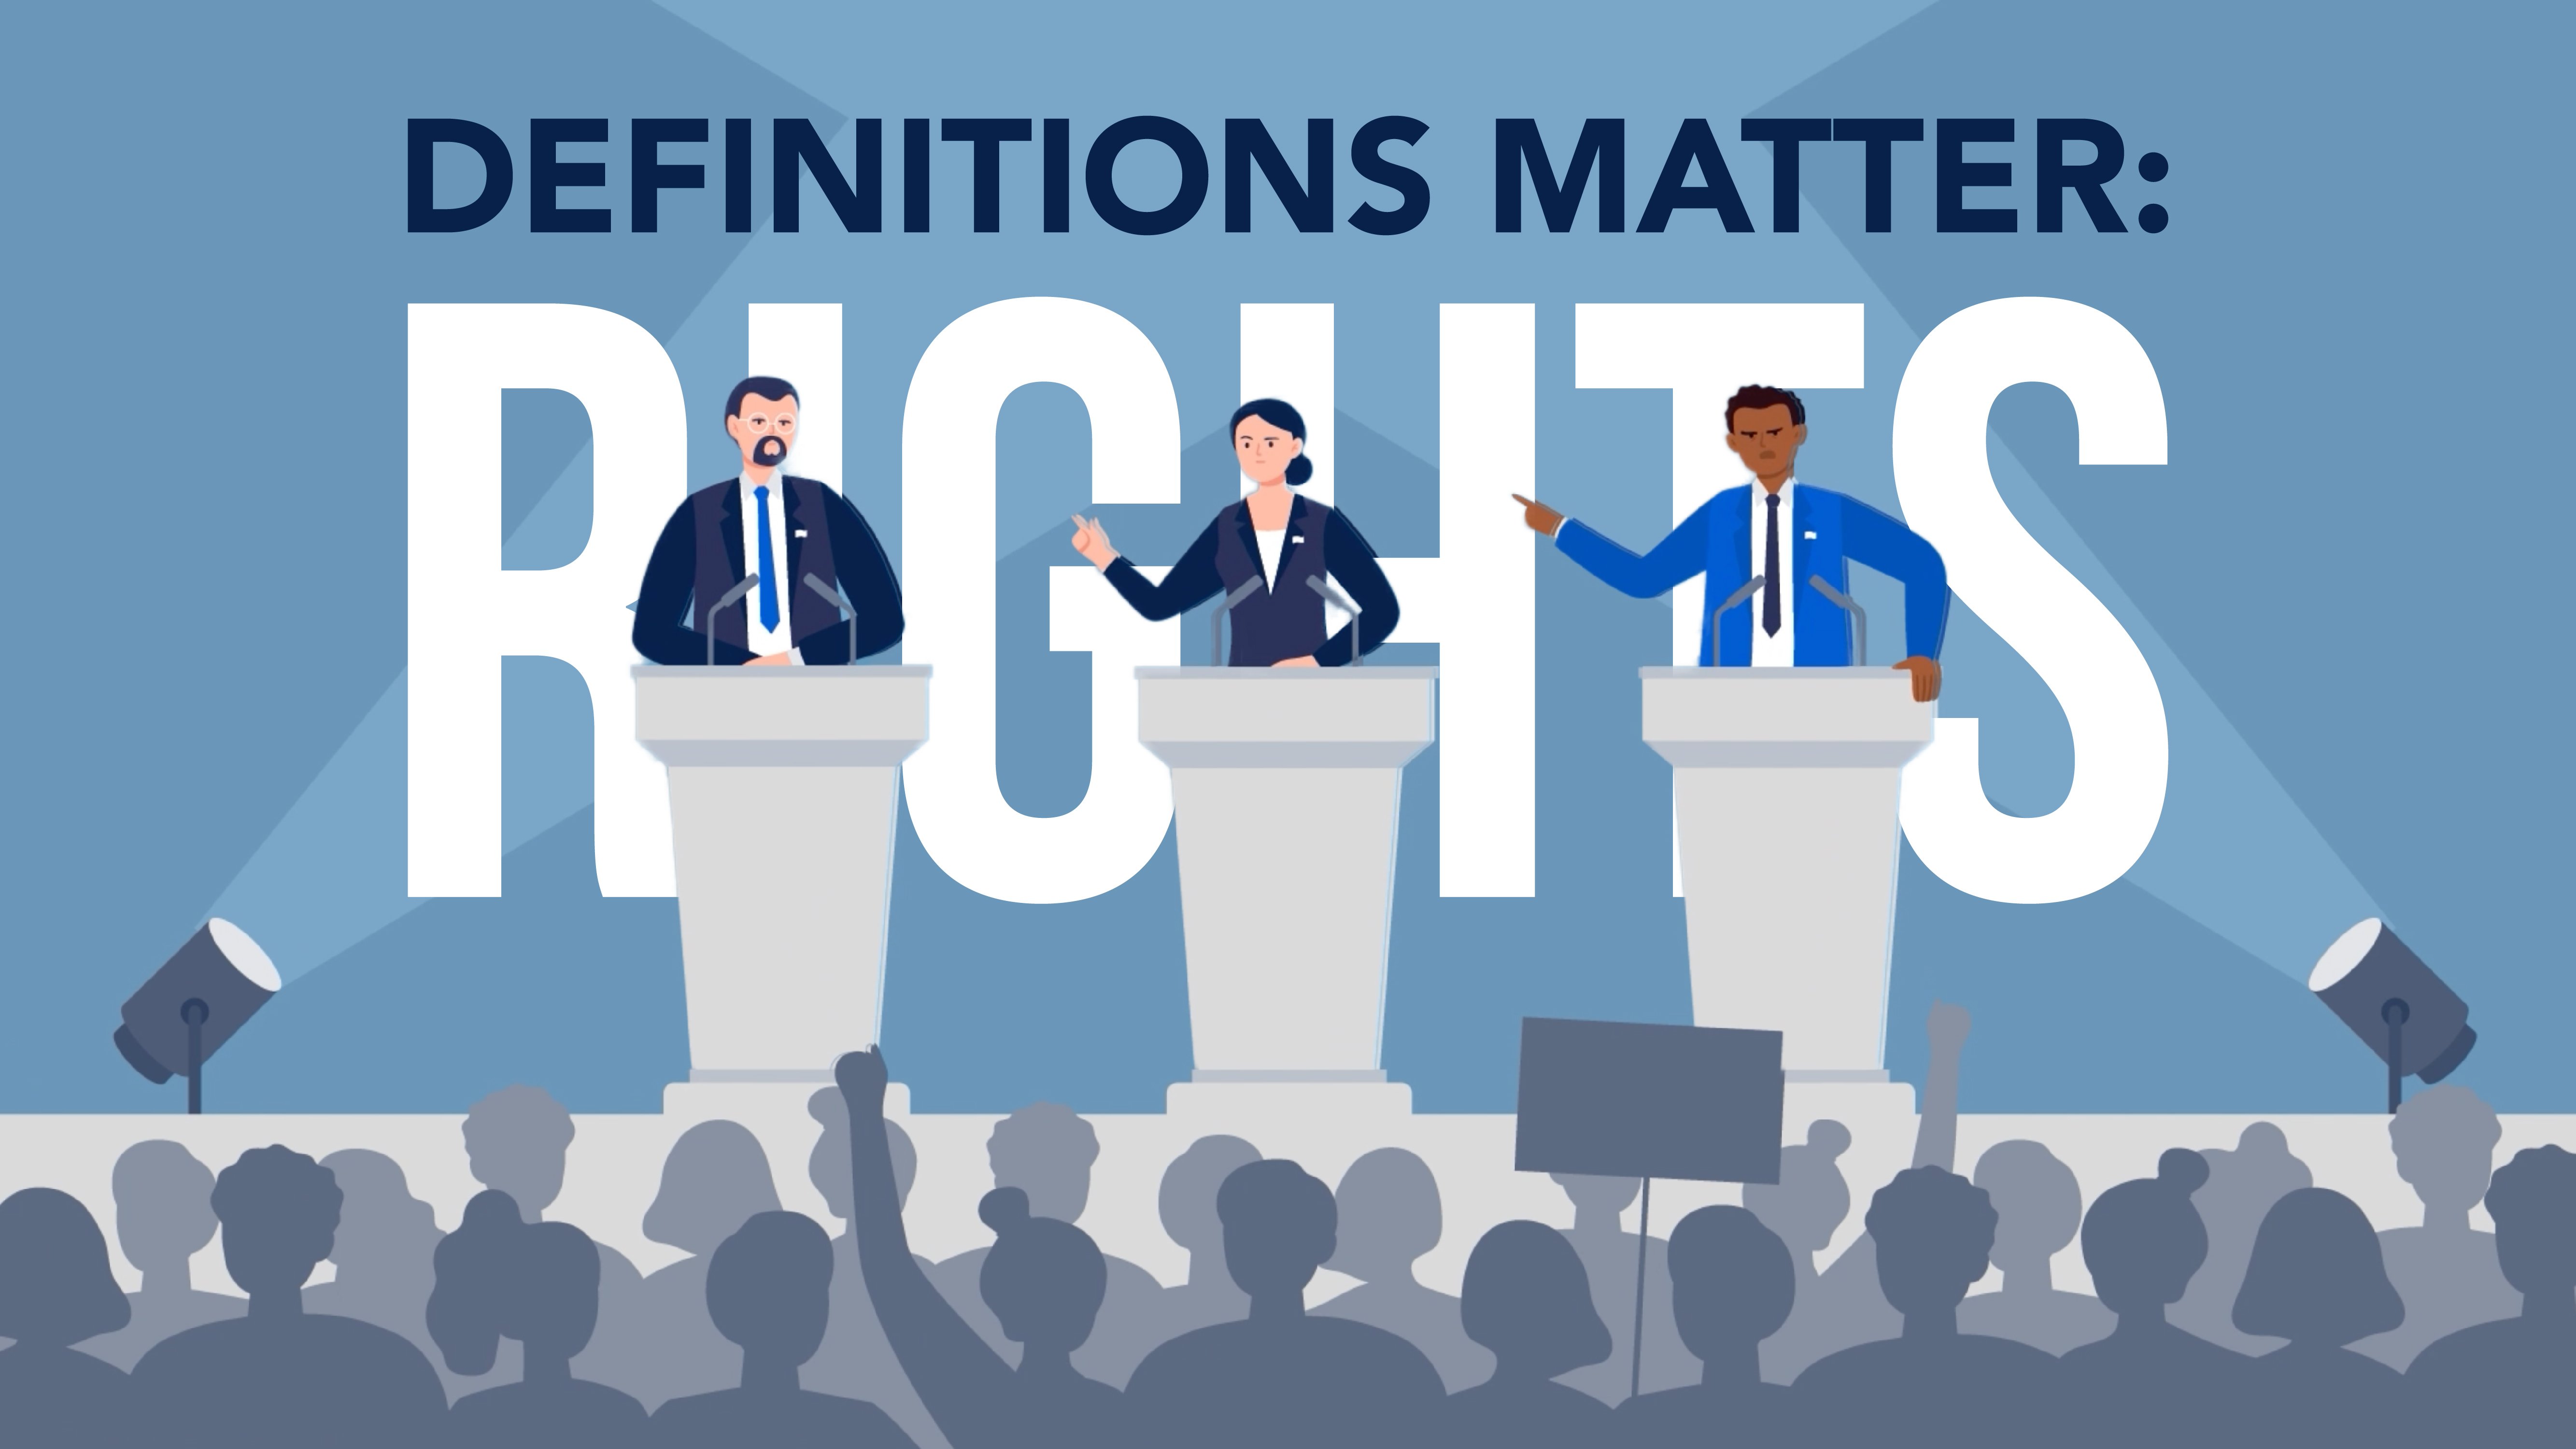 Definitions Matter: Rights